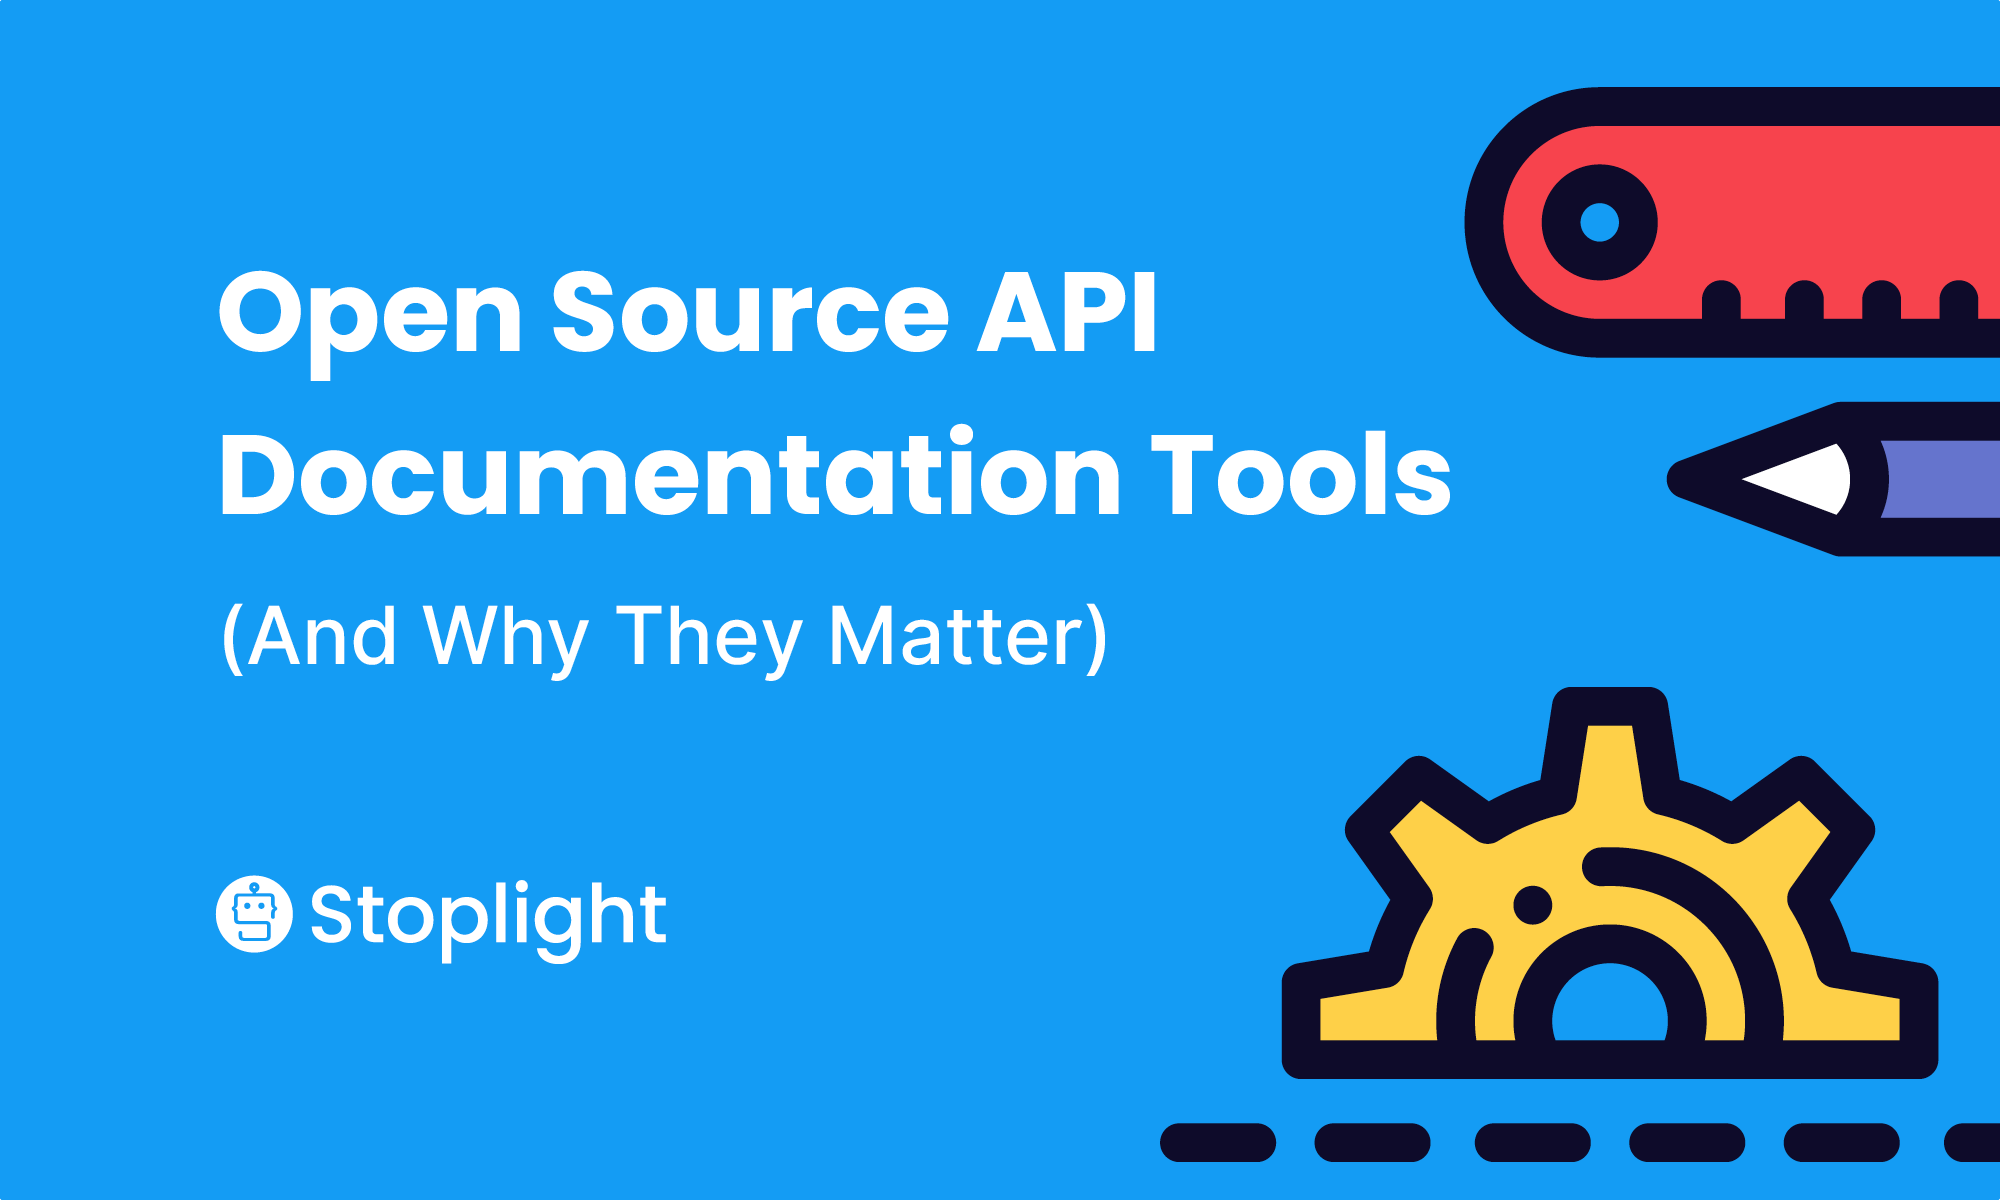 Open Source API Documentation Tools (And Why They Matter)